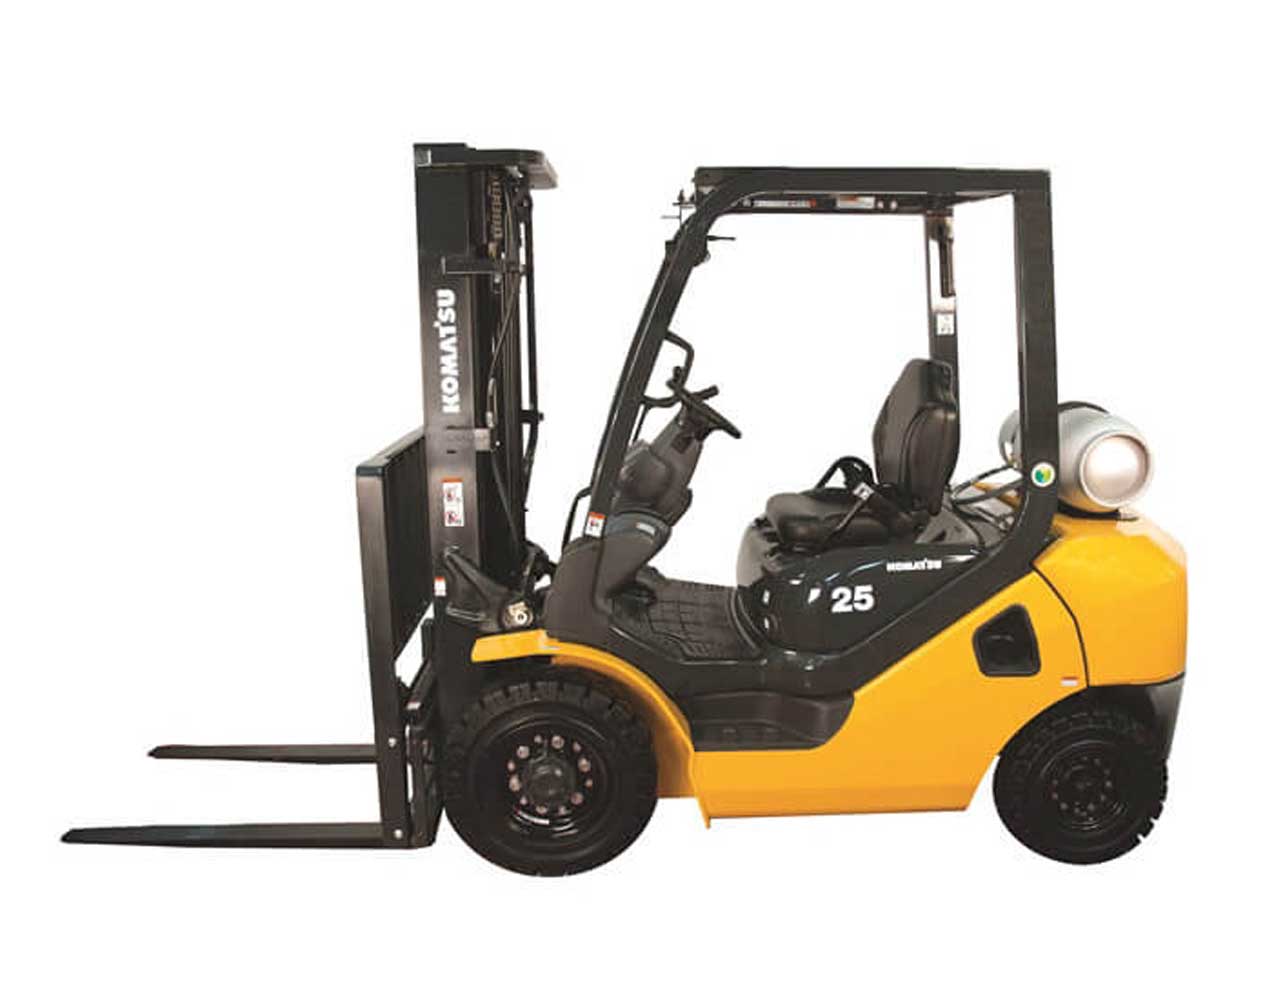 wharehouse-forklift-featured